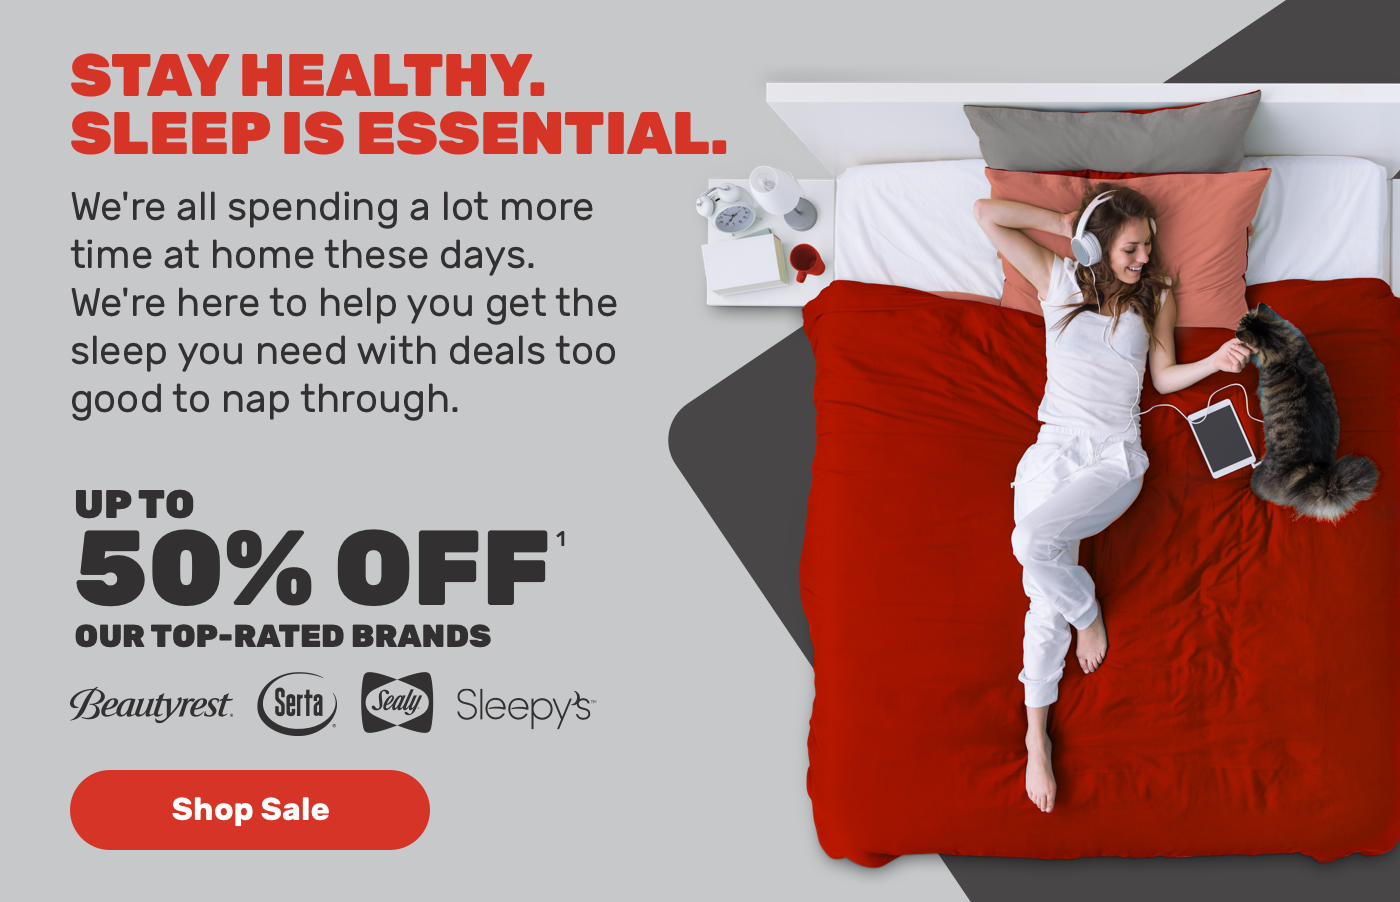 Stay Healthy Sleep is Esential.We're spending alot more time at home these days.We're here to help you get the sleep you need with deals too good to nap through.Upto 50% off.Shop Sale